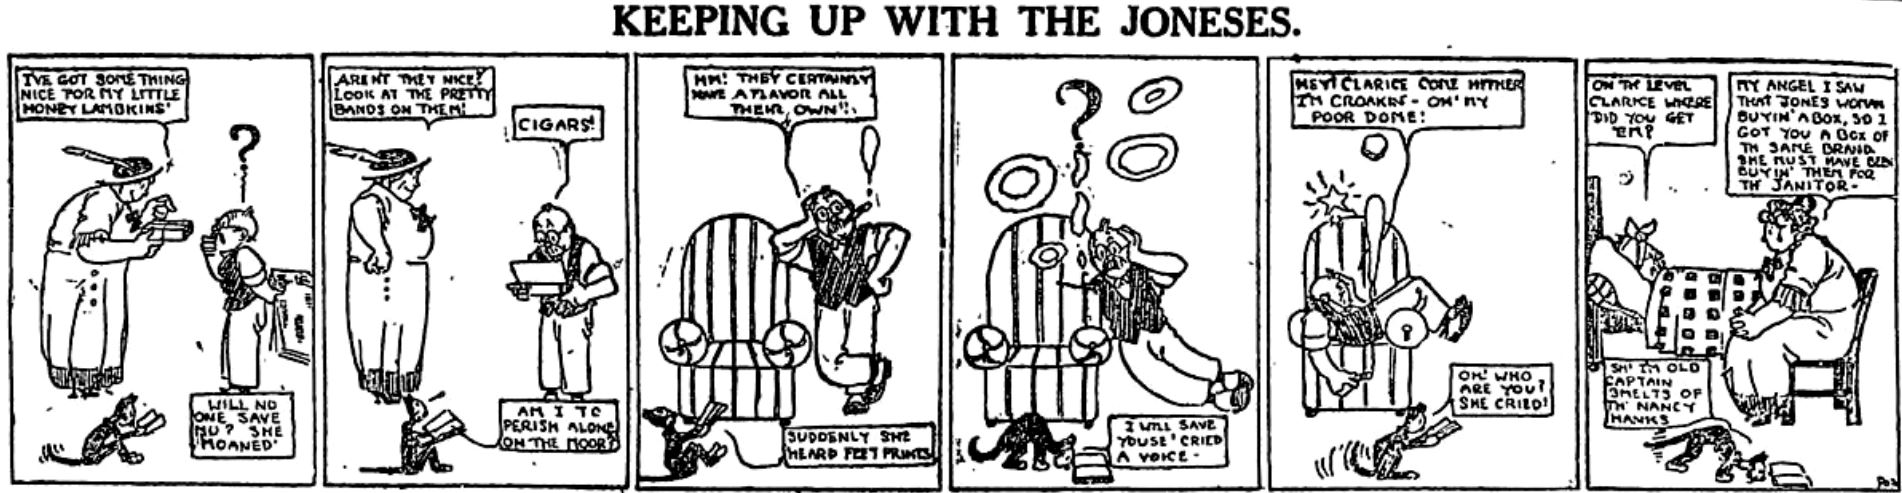 Keeping Up With The Joneses Newspaper Comic Strips